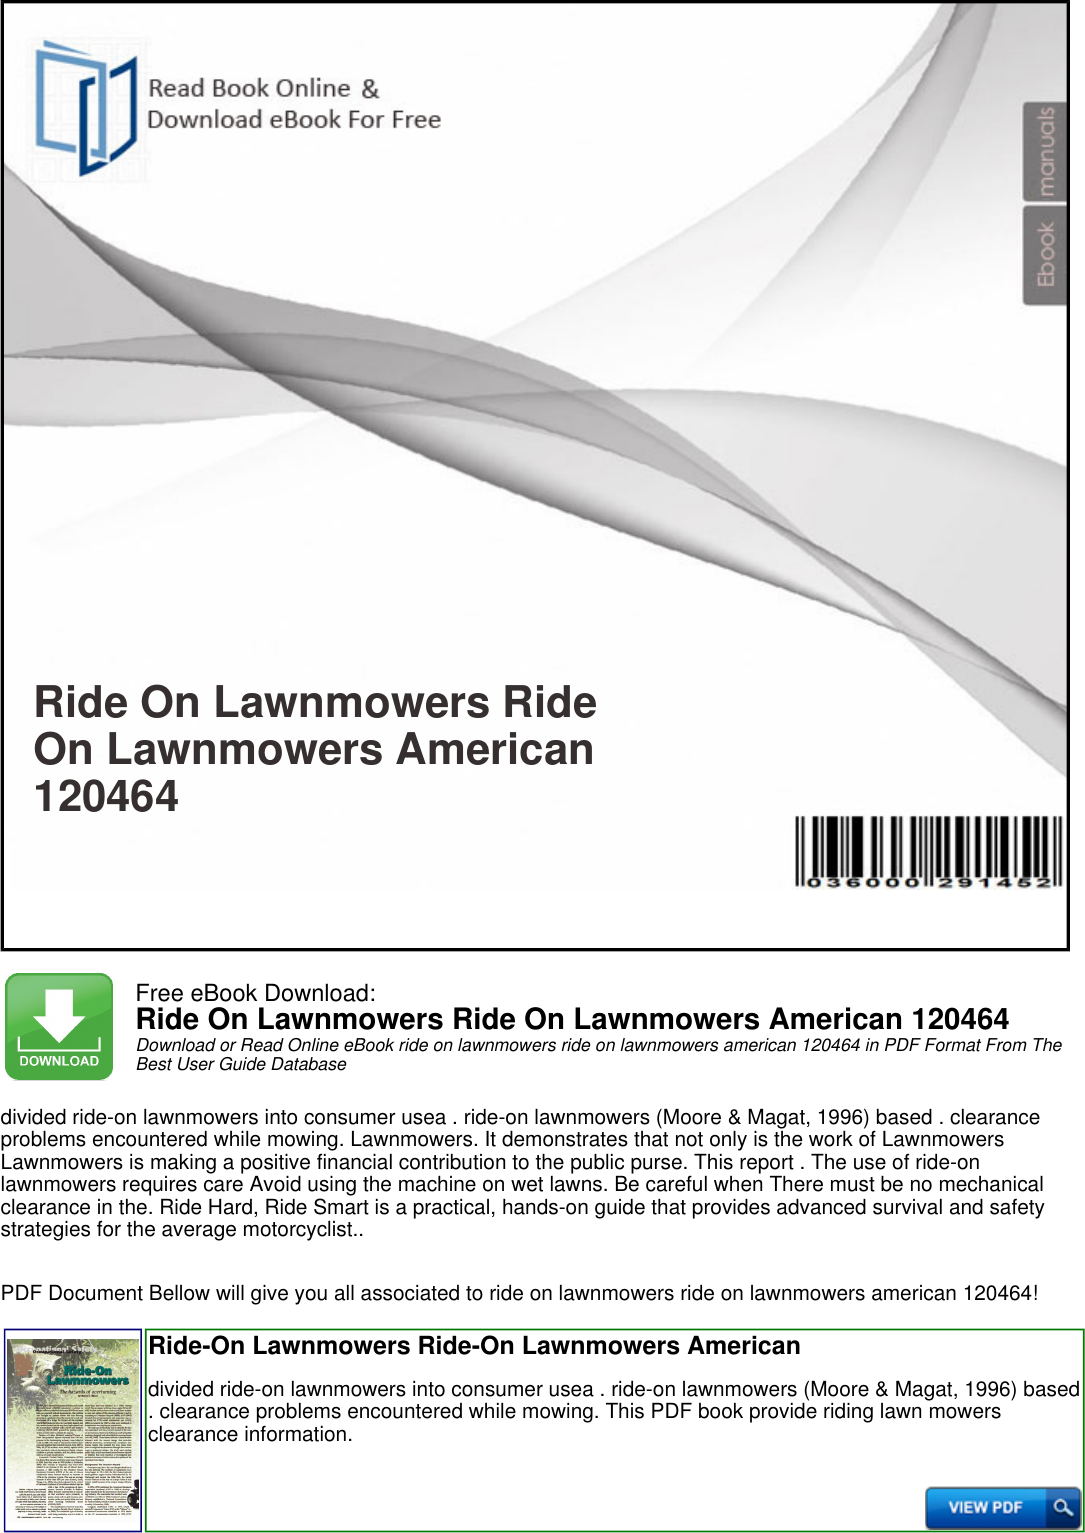 Page 1 of 3 - Ride On Lawnmowers American 120464 - Productmanualguide.com  !! Ride-on-lawnmowers-ride-on-lawnmowers-american-120464